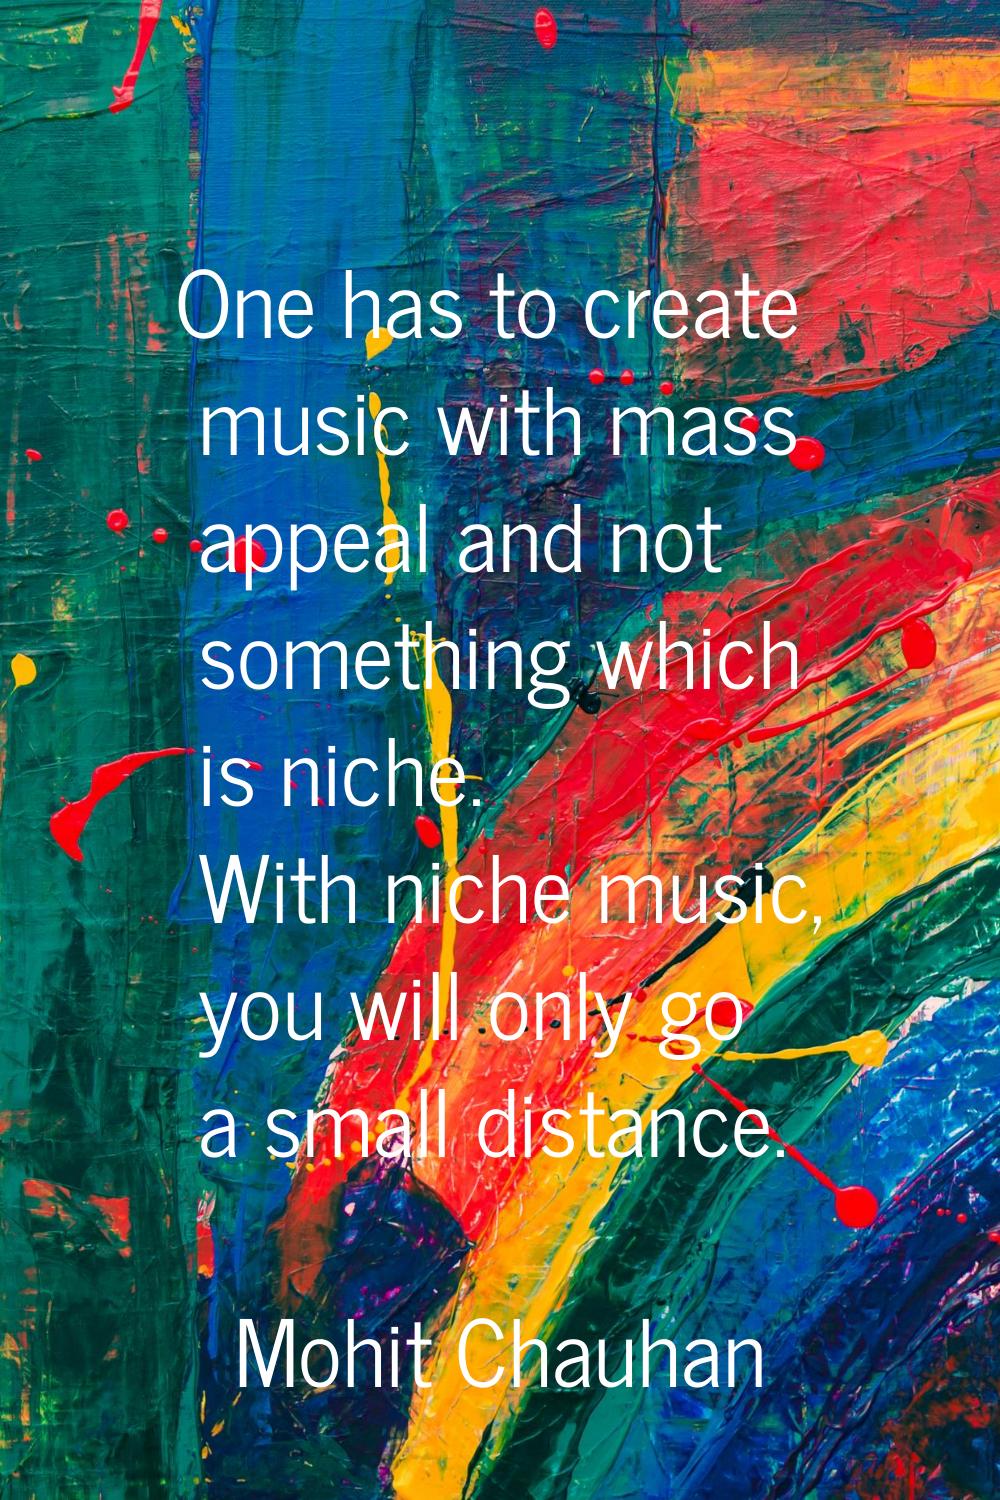 One has to create music with mass appeal and not something which is niche. With niche music, you wi